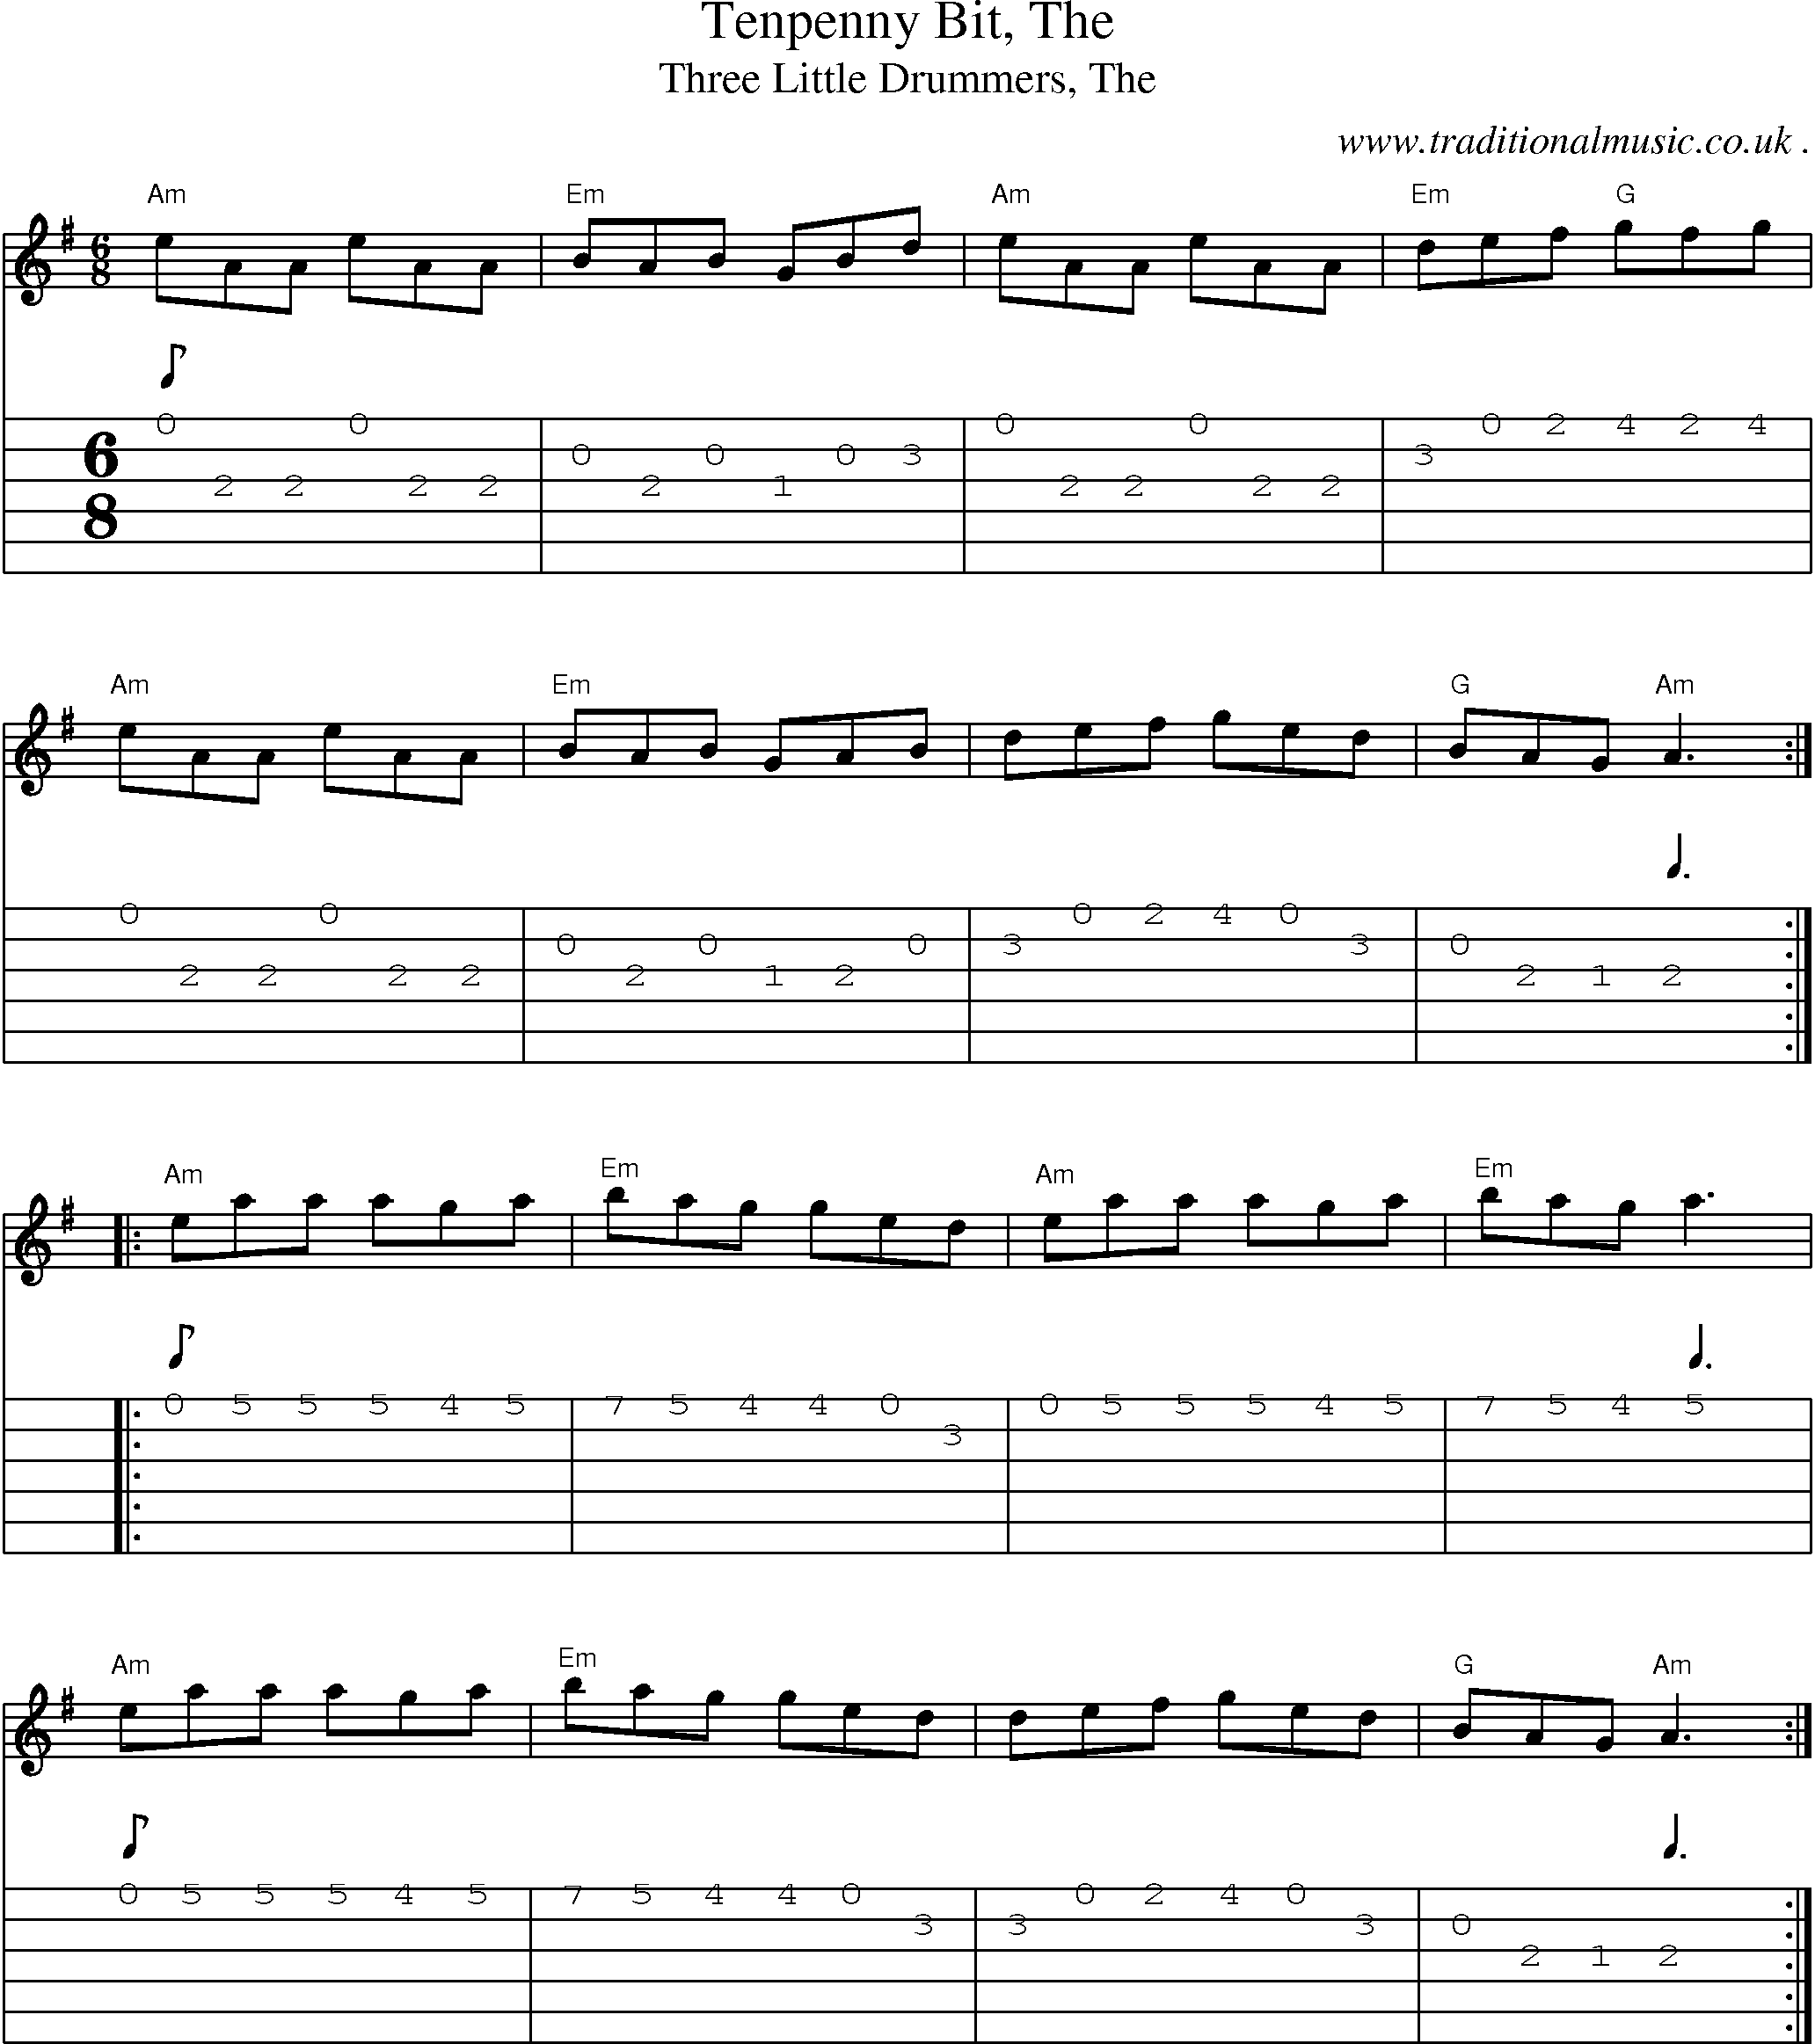 Music Score and Guitar Tabs for Tenpenny Bit The